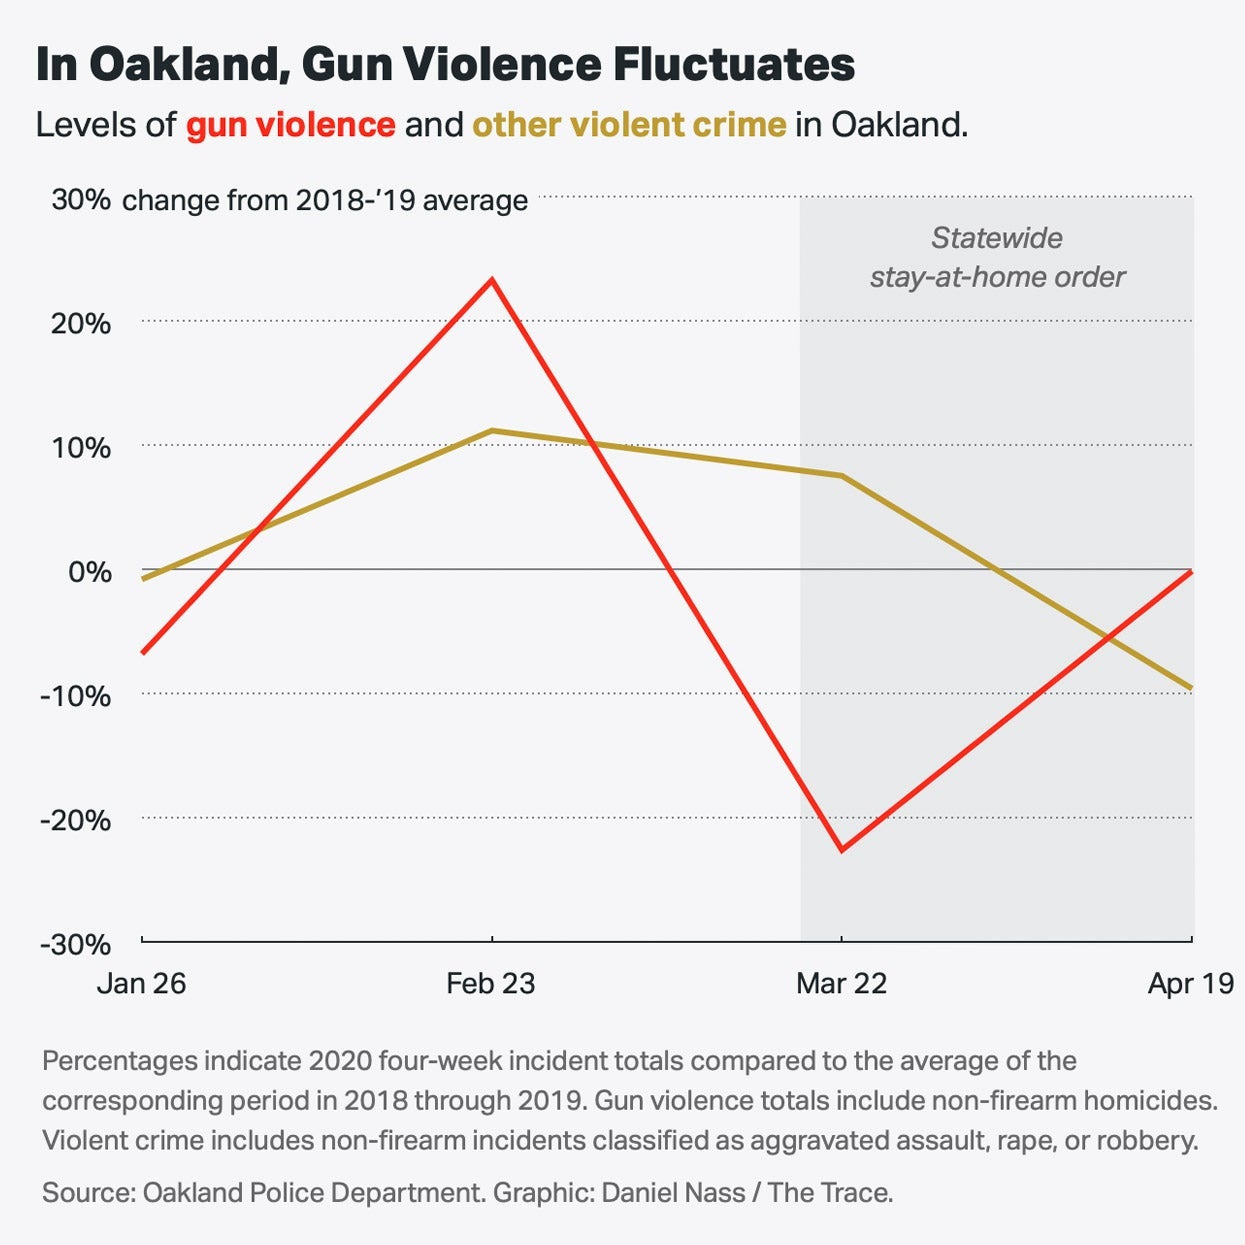 A chart showing that gun violence fluctuated in Oakland